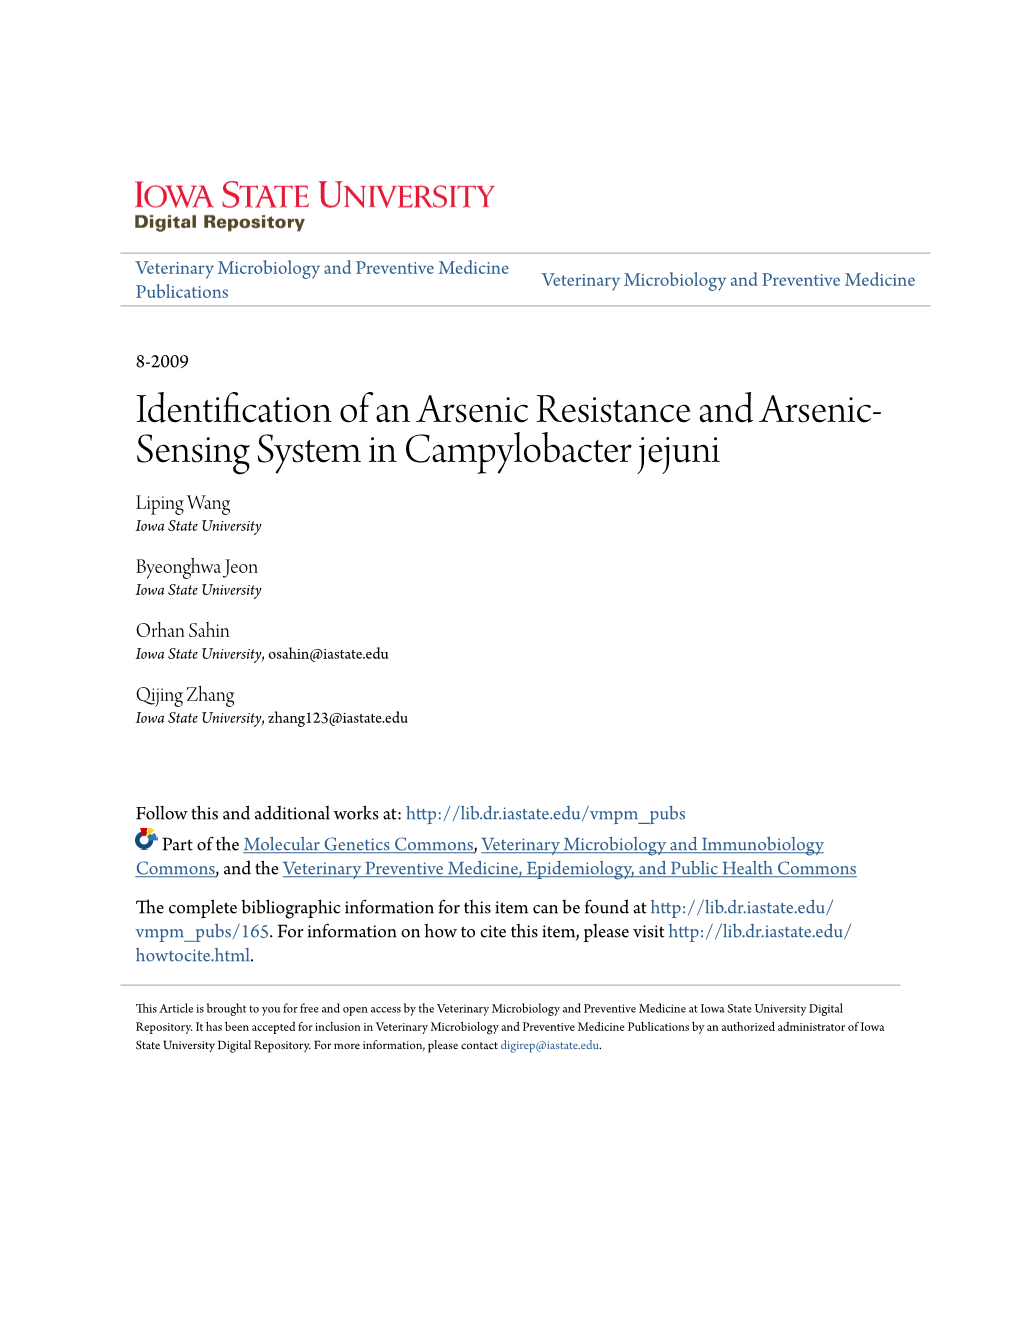 Identification of an Arsenic Resistance and Arsenic-Sensing System in Campylobacter Jejuni